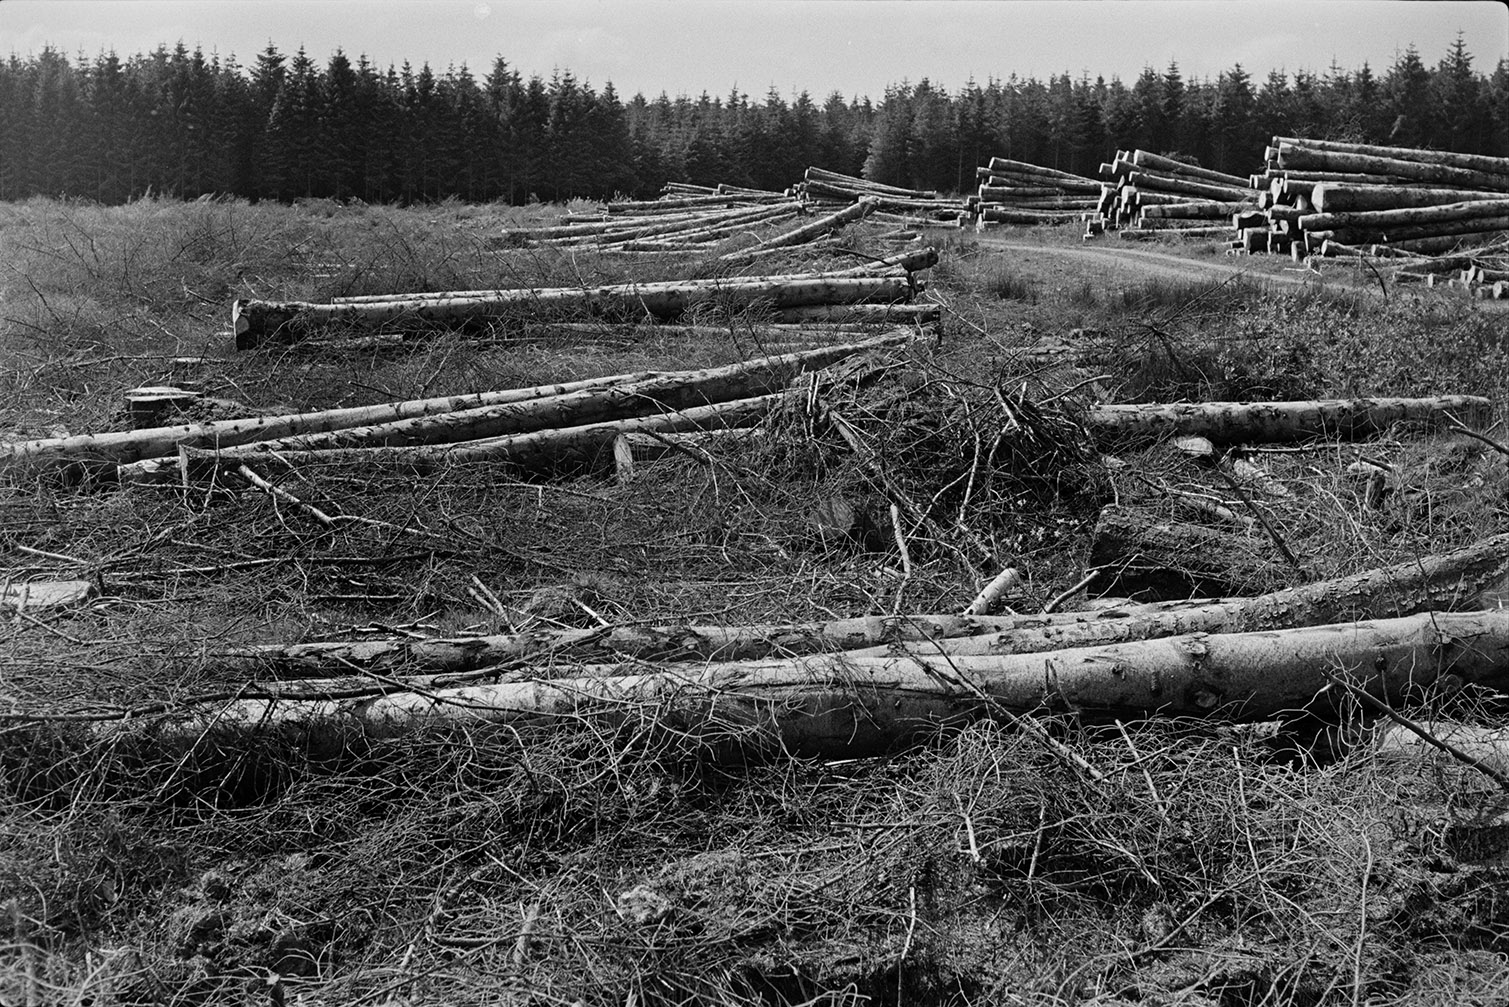 A number of piles of logs which have been felled at Hartland Forest. The forest is visible in the background.